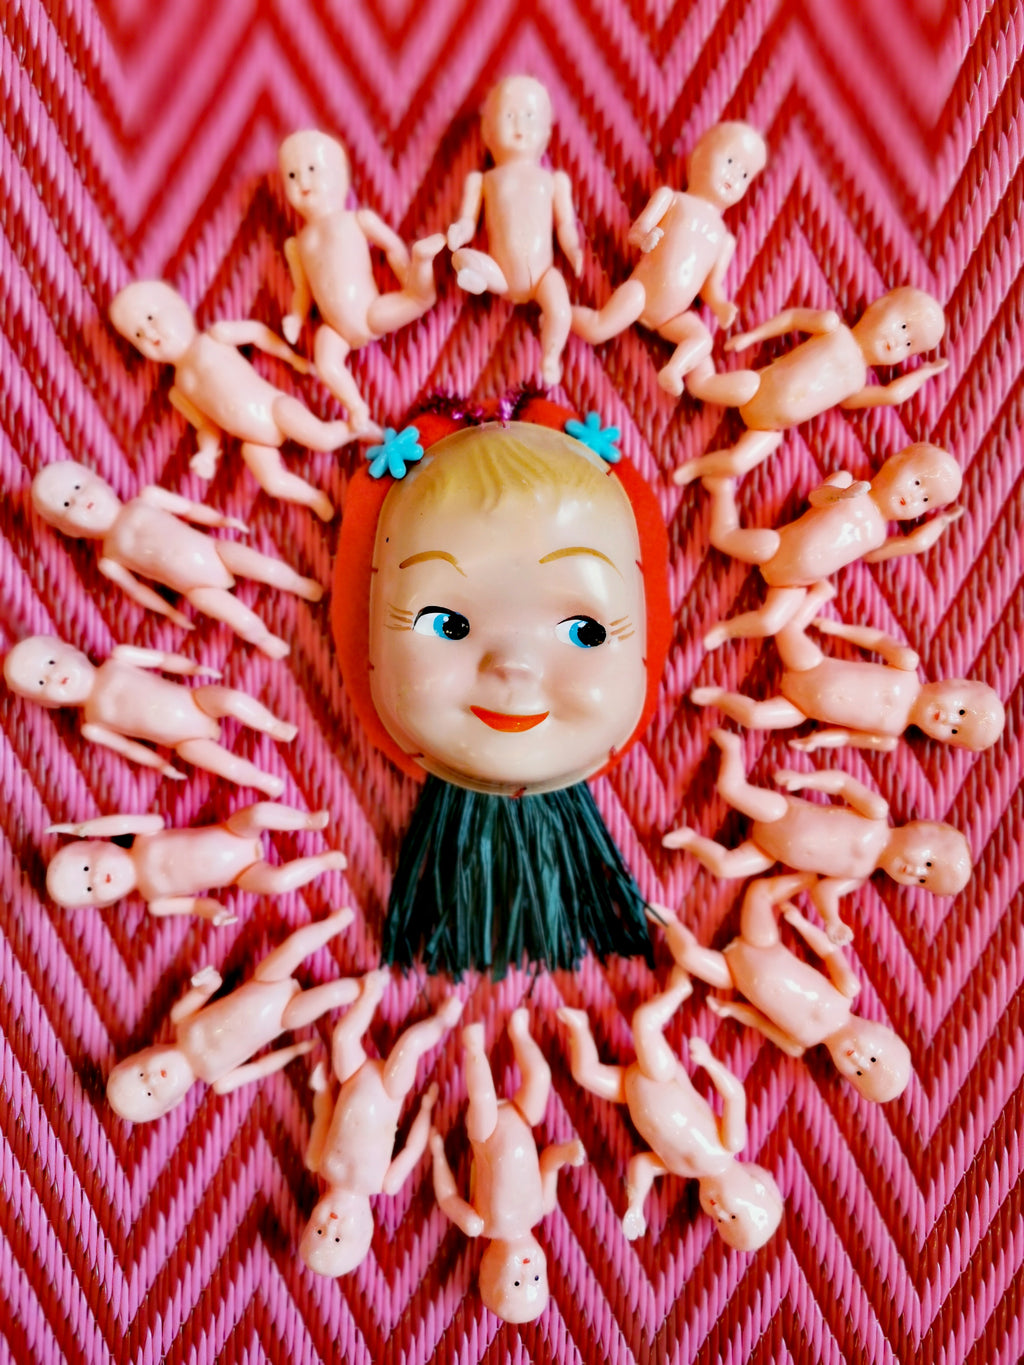 A selection of three fabulous types of 1950s  babies, literally, what more could you ask of us??

Plastic

Small jointed 6.5cm

Medium finger in mouth 7cm

Large eyes right 10cm

